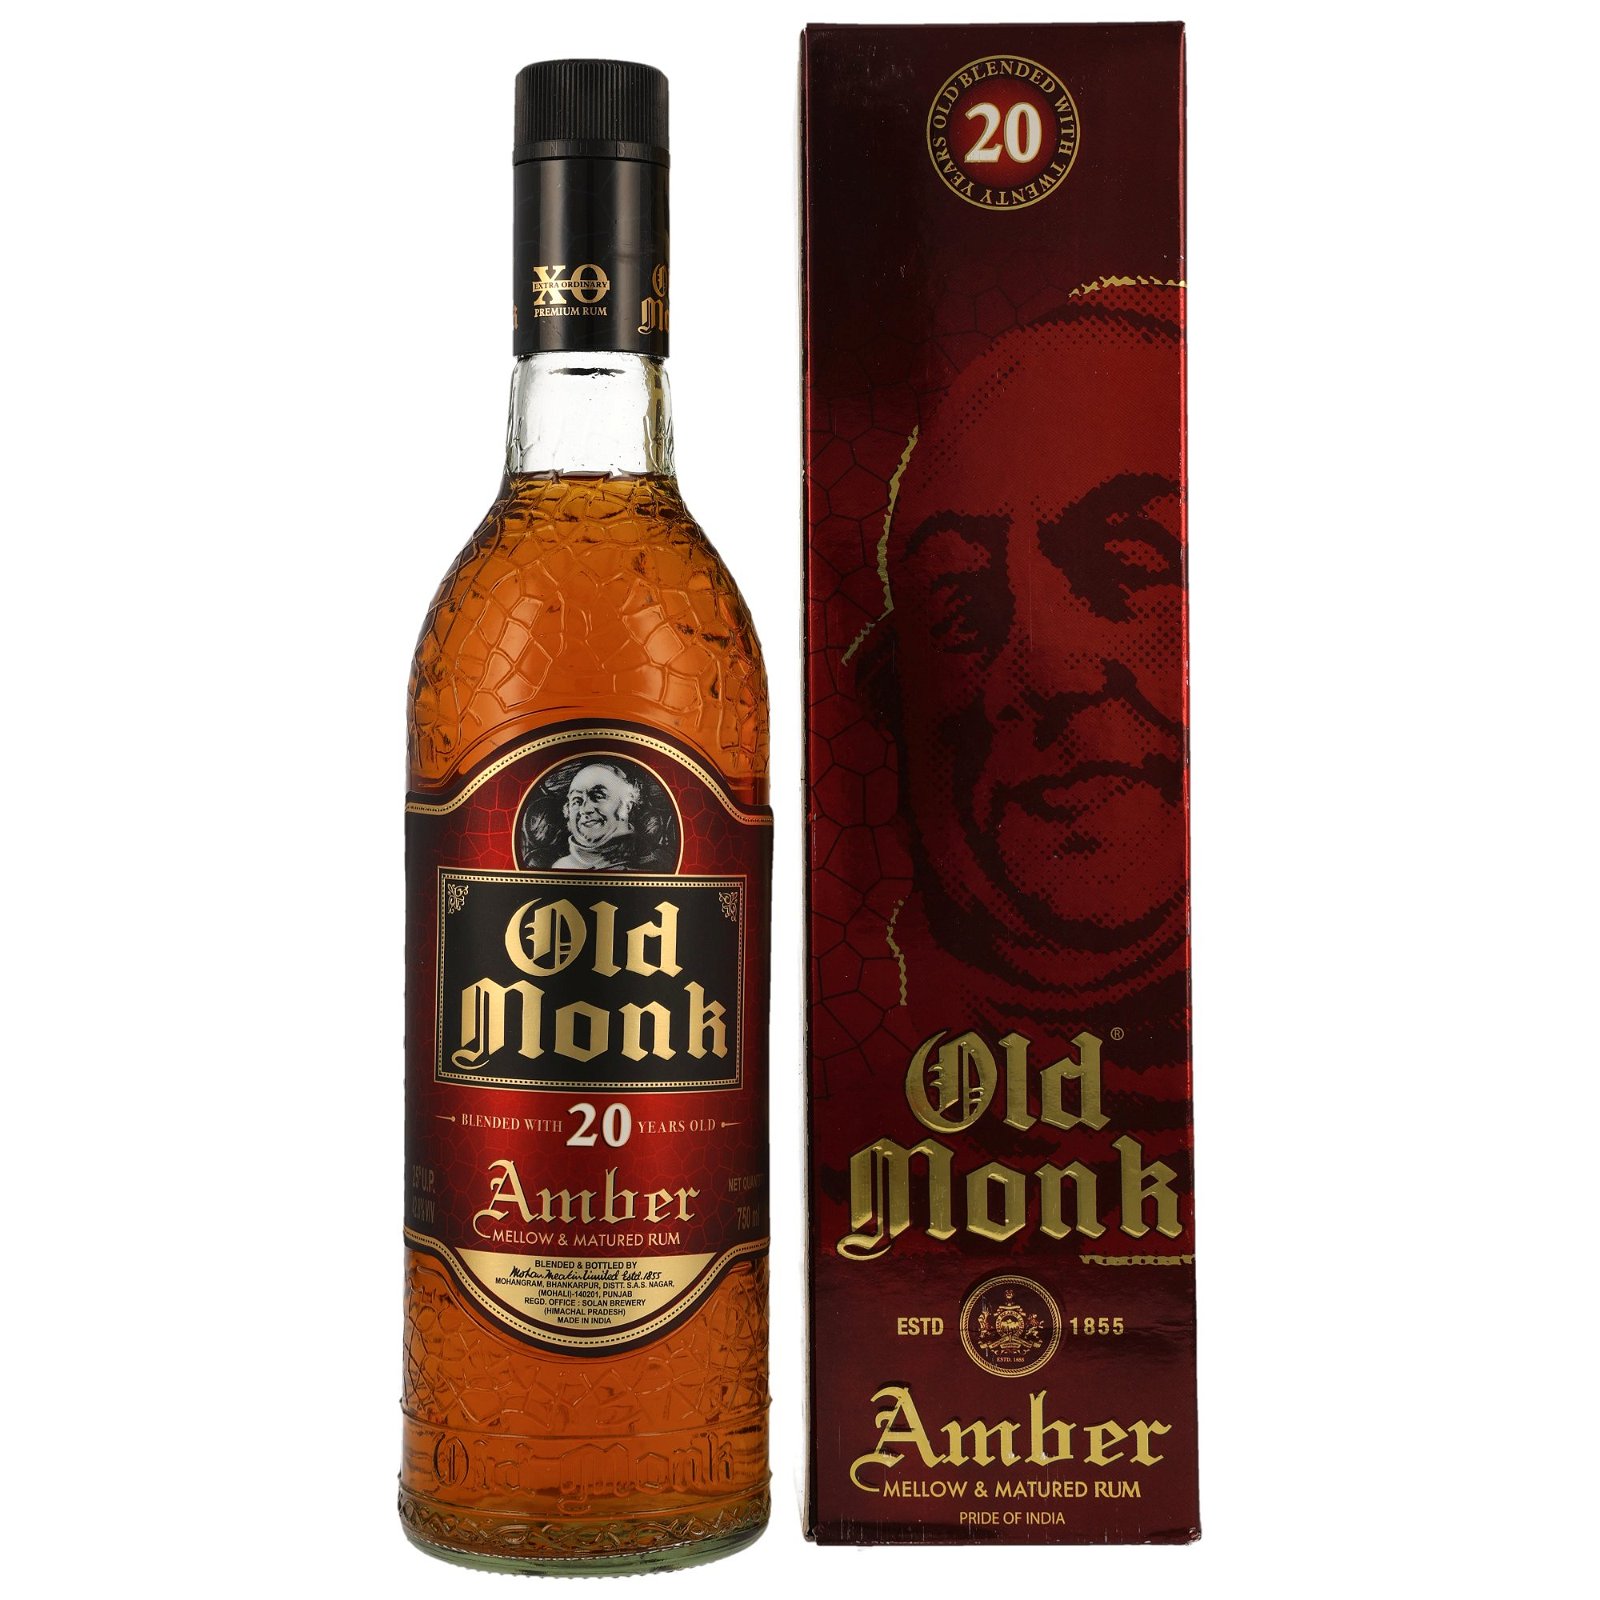 Old Monk Amber